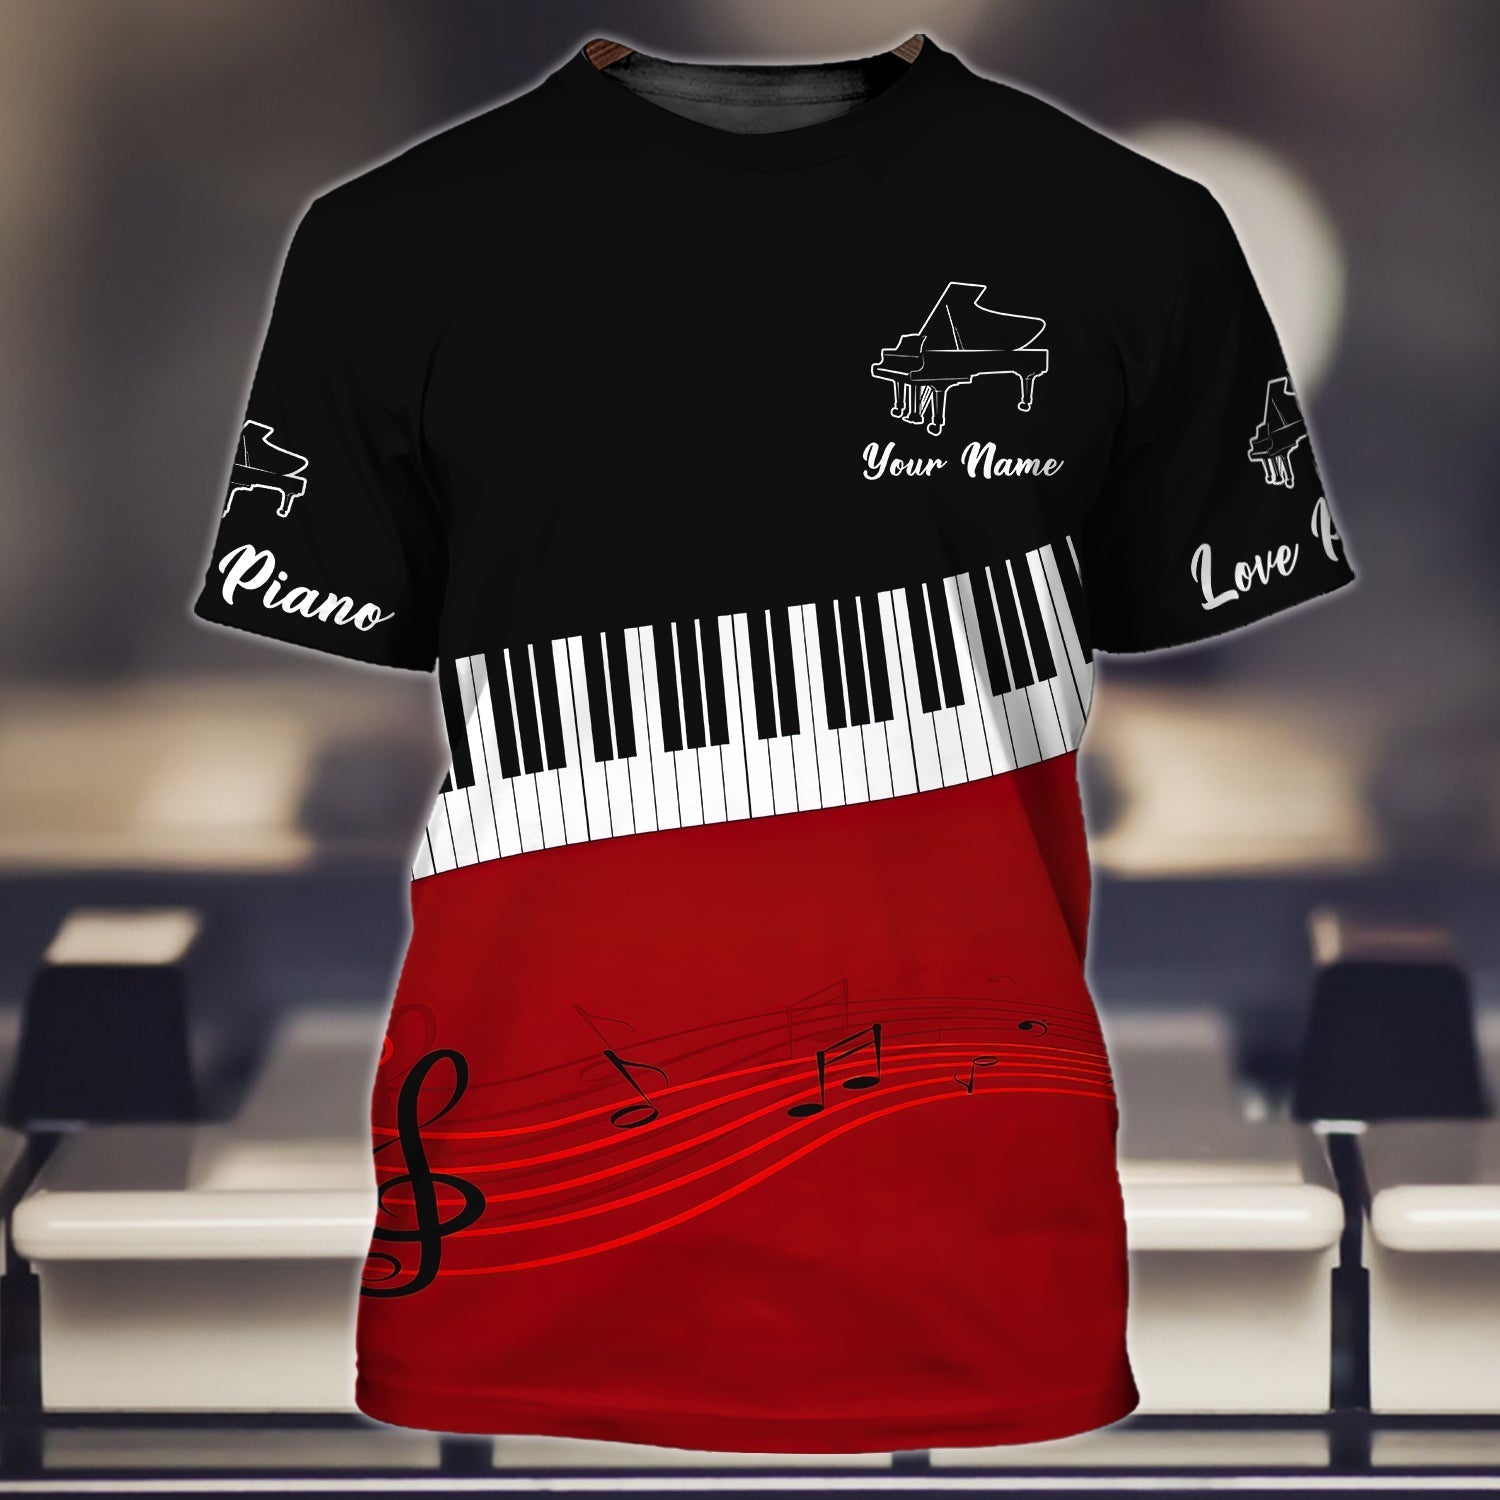 Customized Cool Piano Tshirt For Men And Women/ 3D Shirt For My Pianist Husband/ Piano Shirt For Him Her